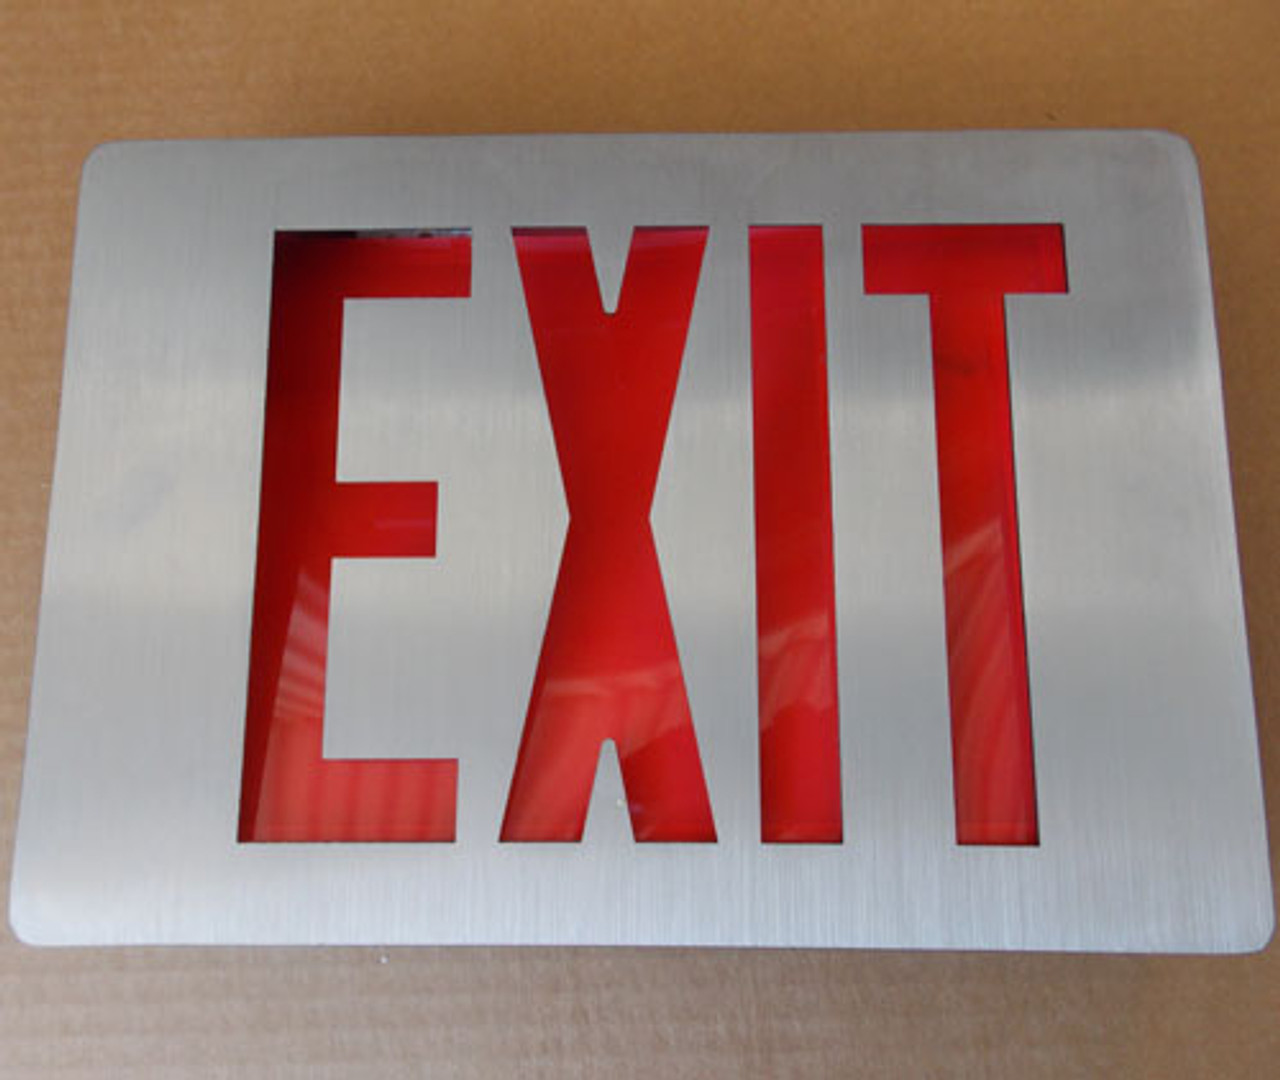 Lithonia Lighting Thermoplastic LED Exit Sign & Reviews